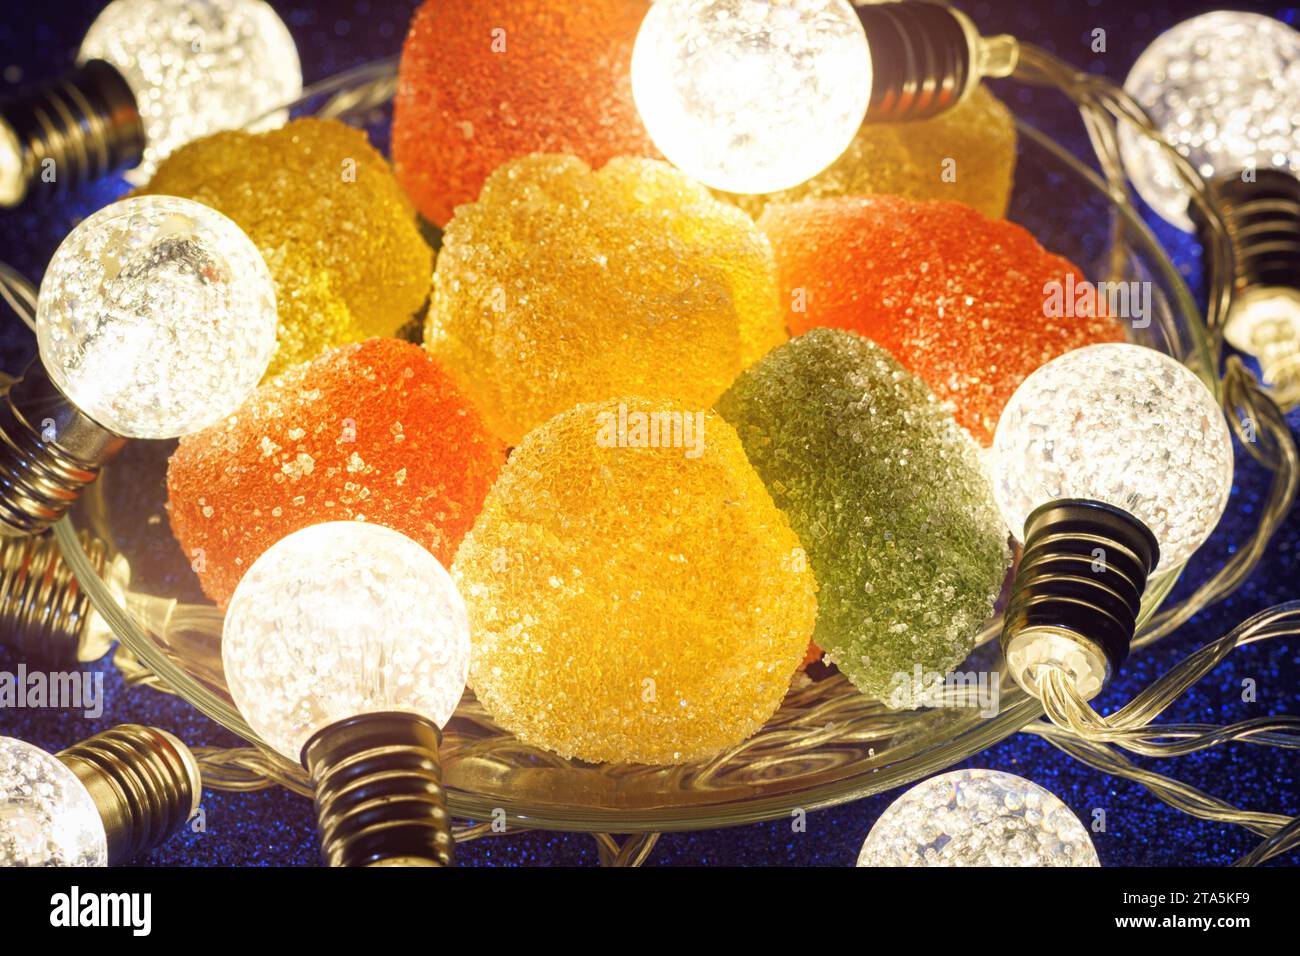 Yummy Flavored Jelly Candies With Holidays Illumination. Closeup View On Plate With Fruity Marmalade. Stock Photo